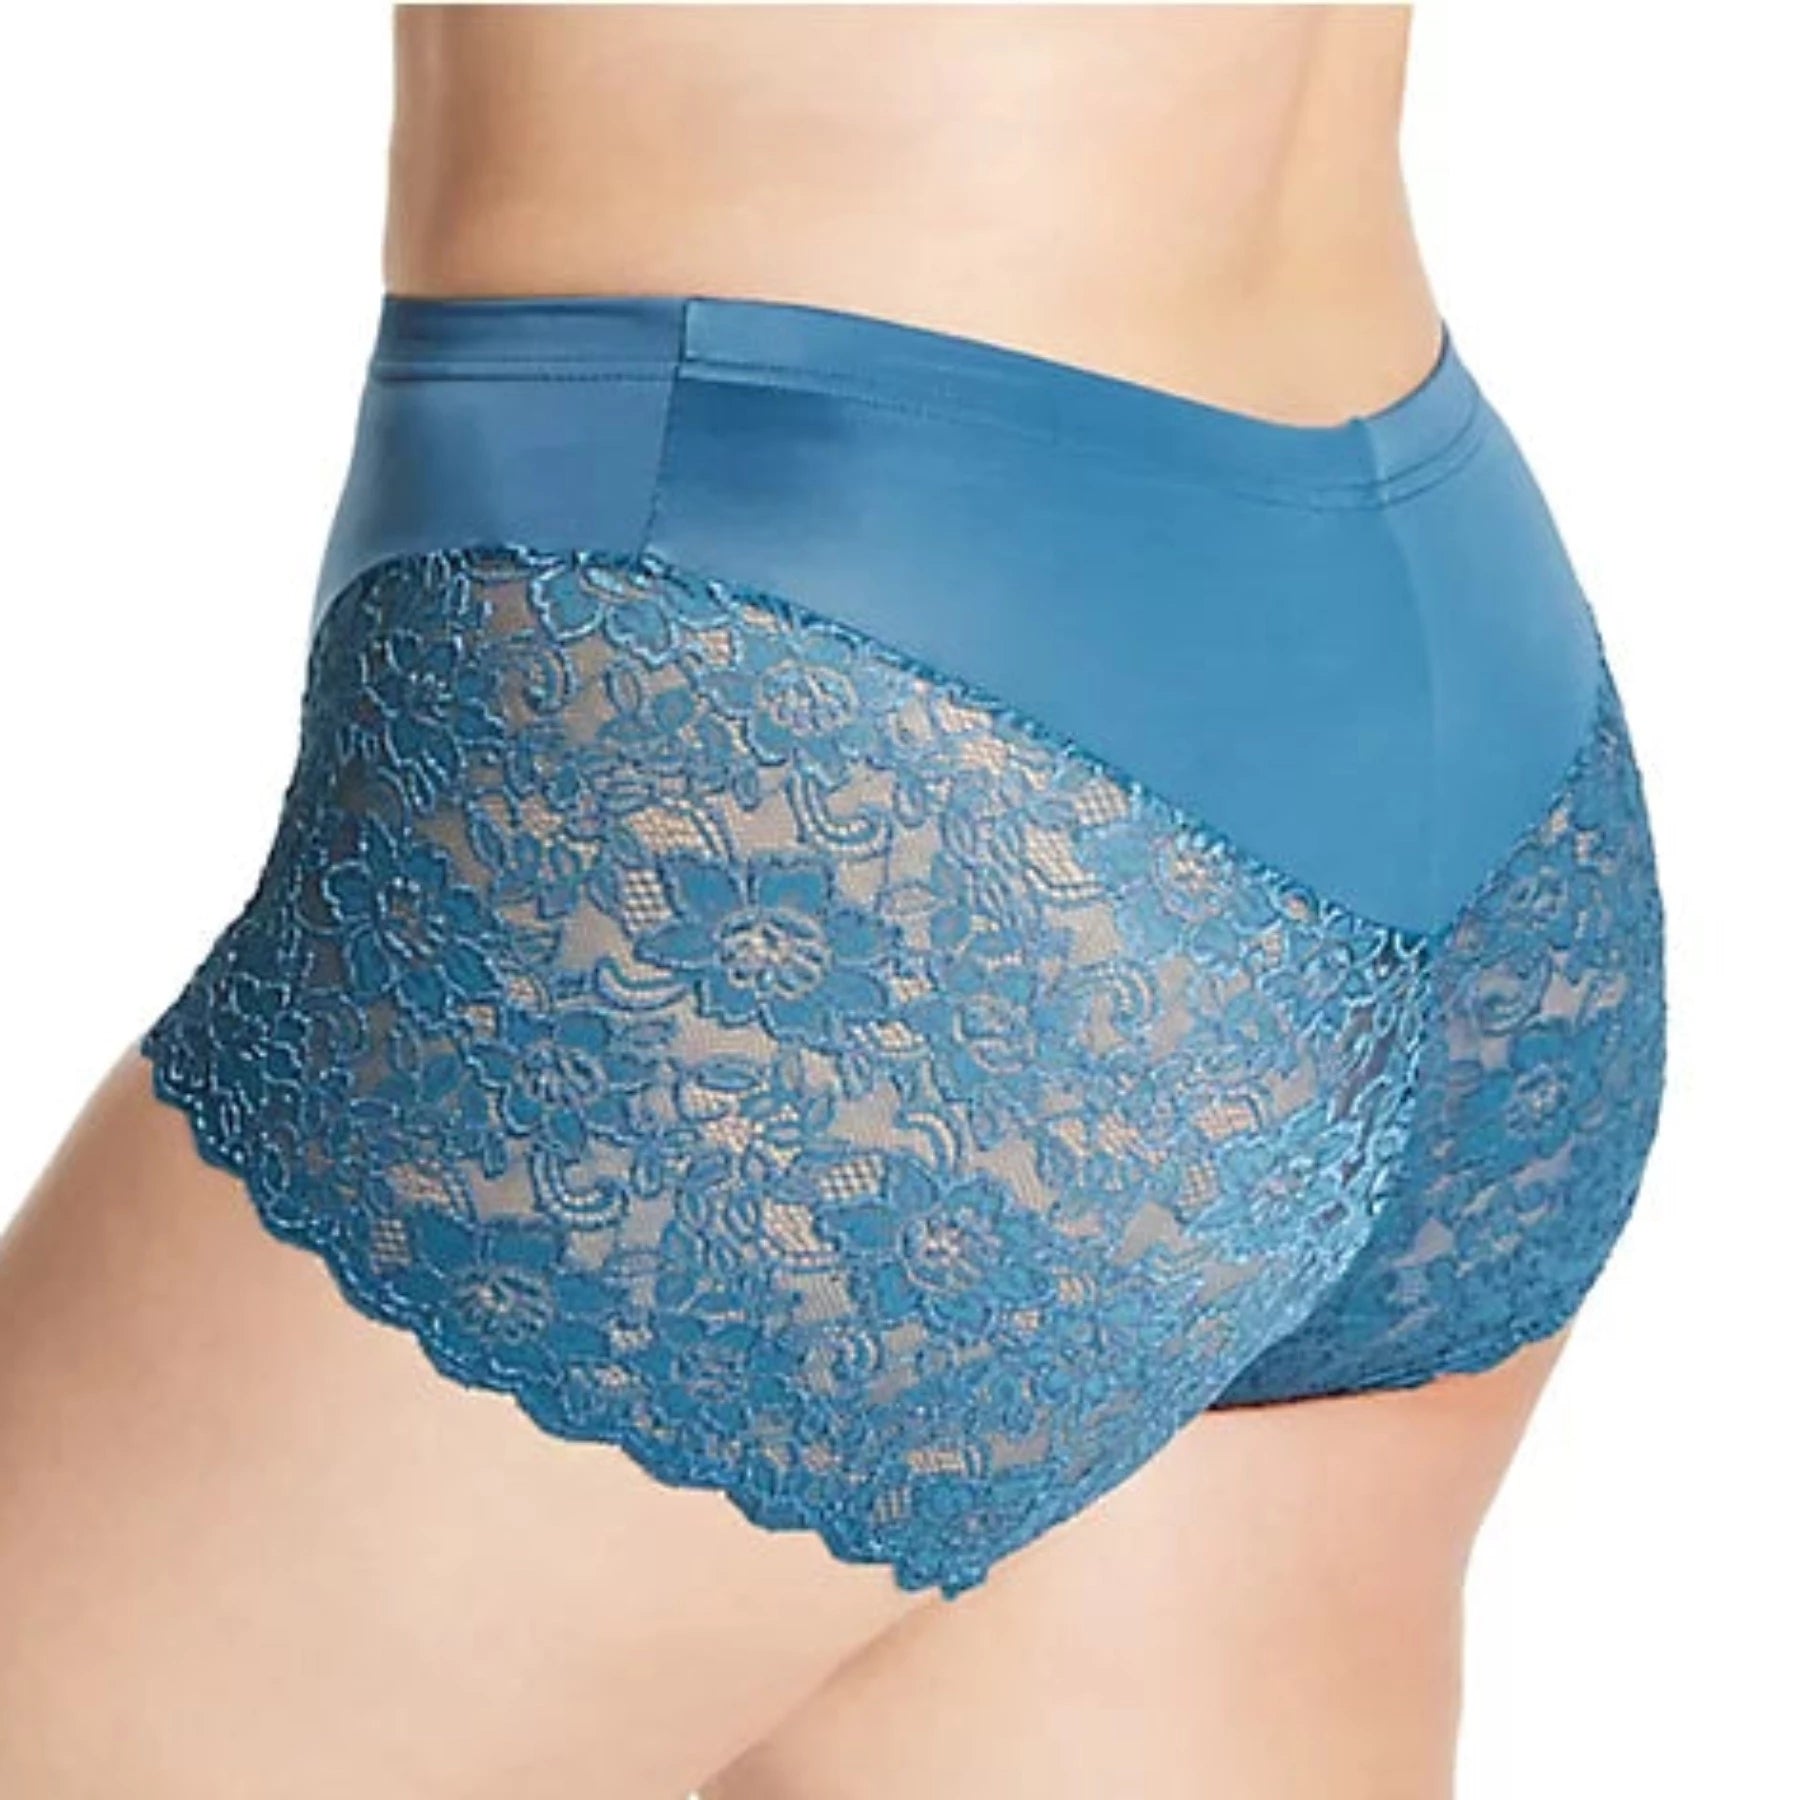 Cheeky Stretch Lace Panty 3311 - Teal